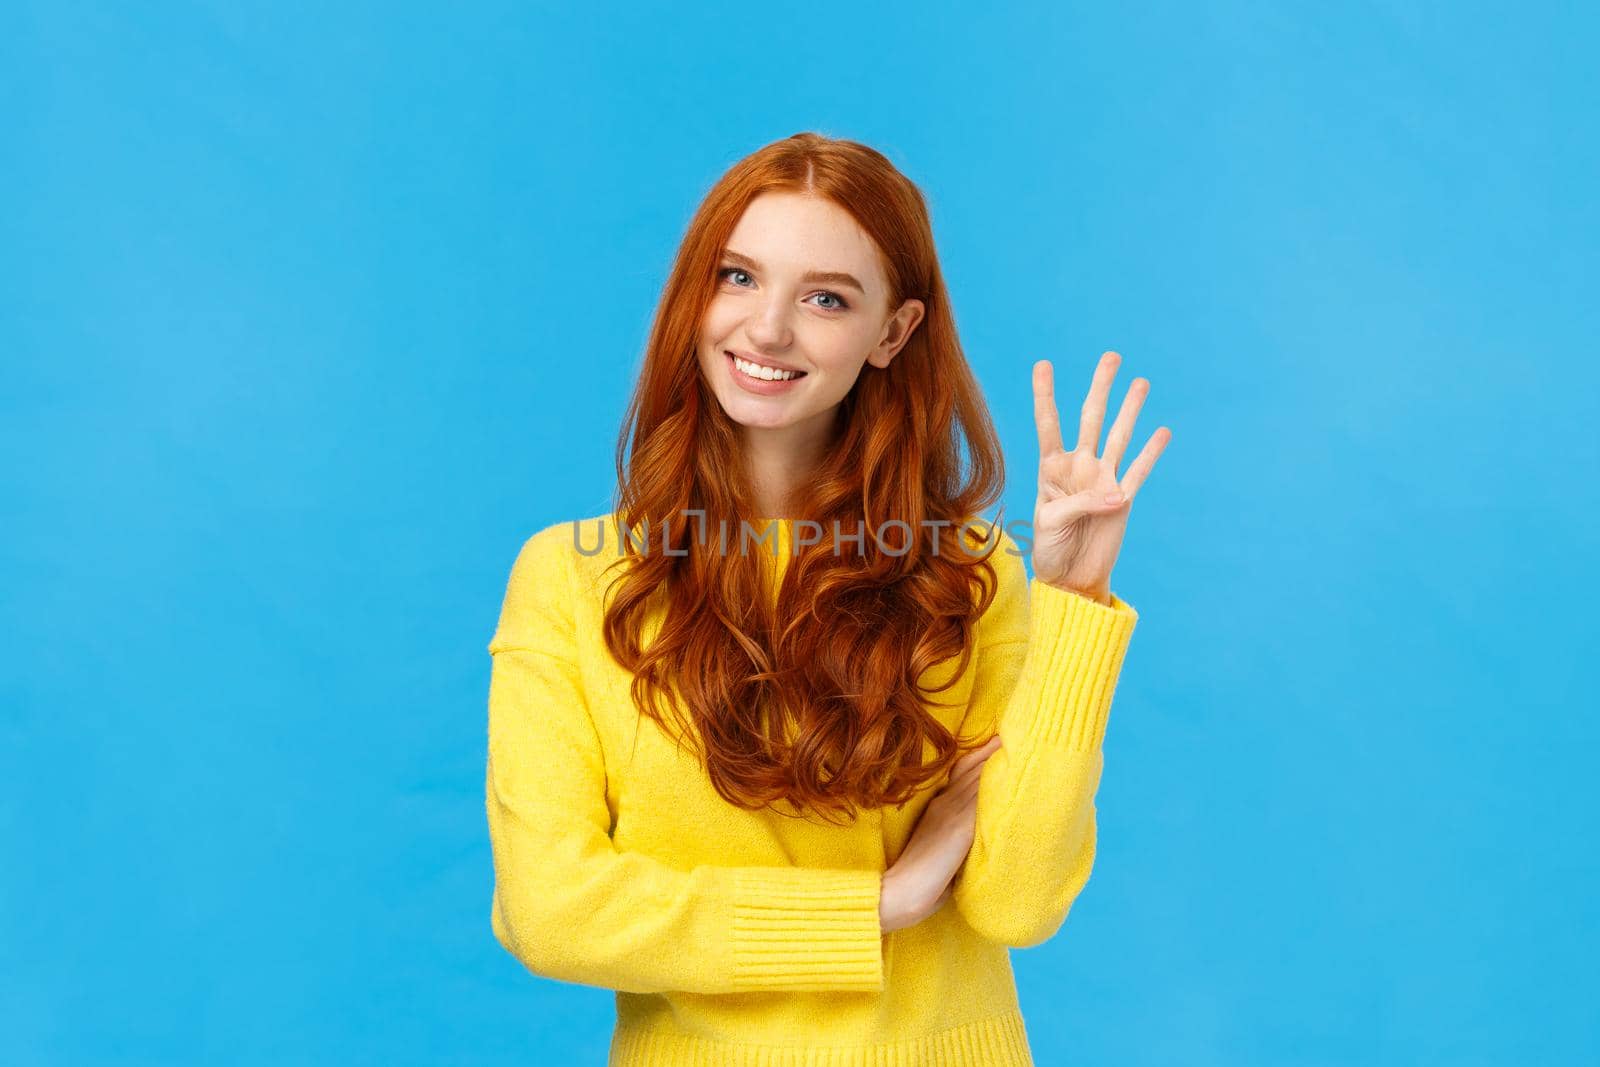 Consumer, shopping and fashion concept. Attractive ginger girl, redhead woman making reservetion, place order four products, smiling and gazing friendly camera, counting with fingers, blue background.